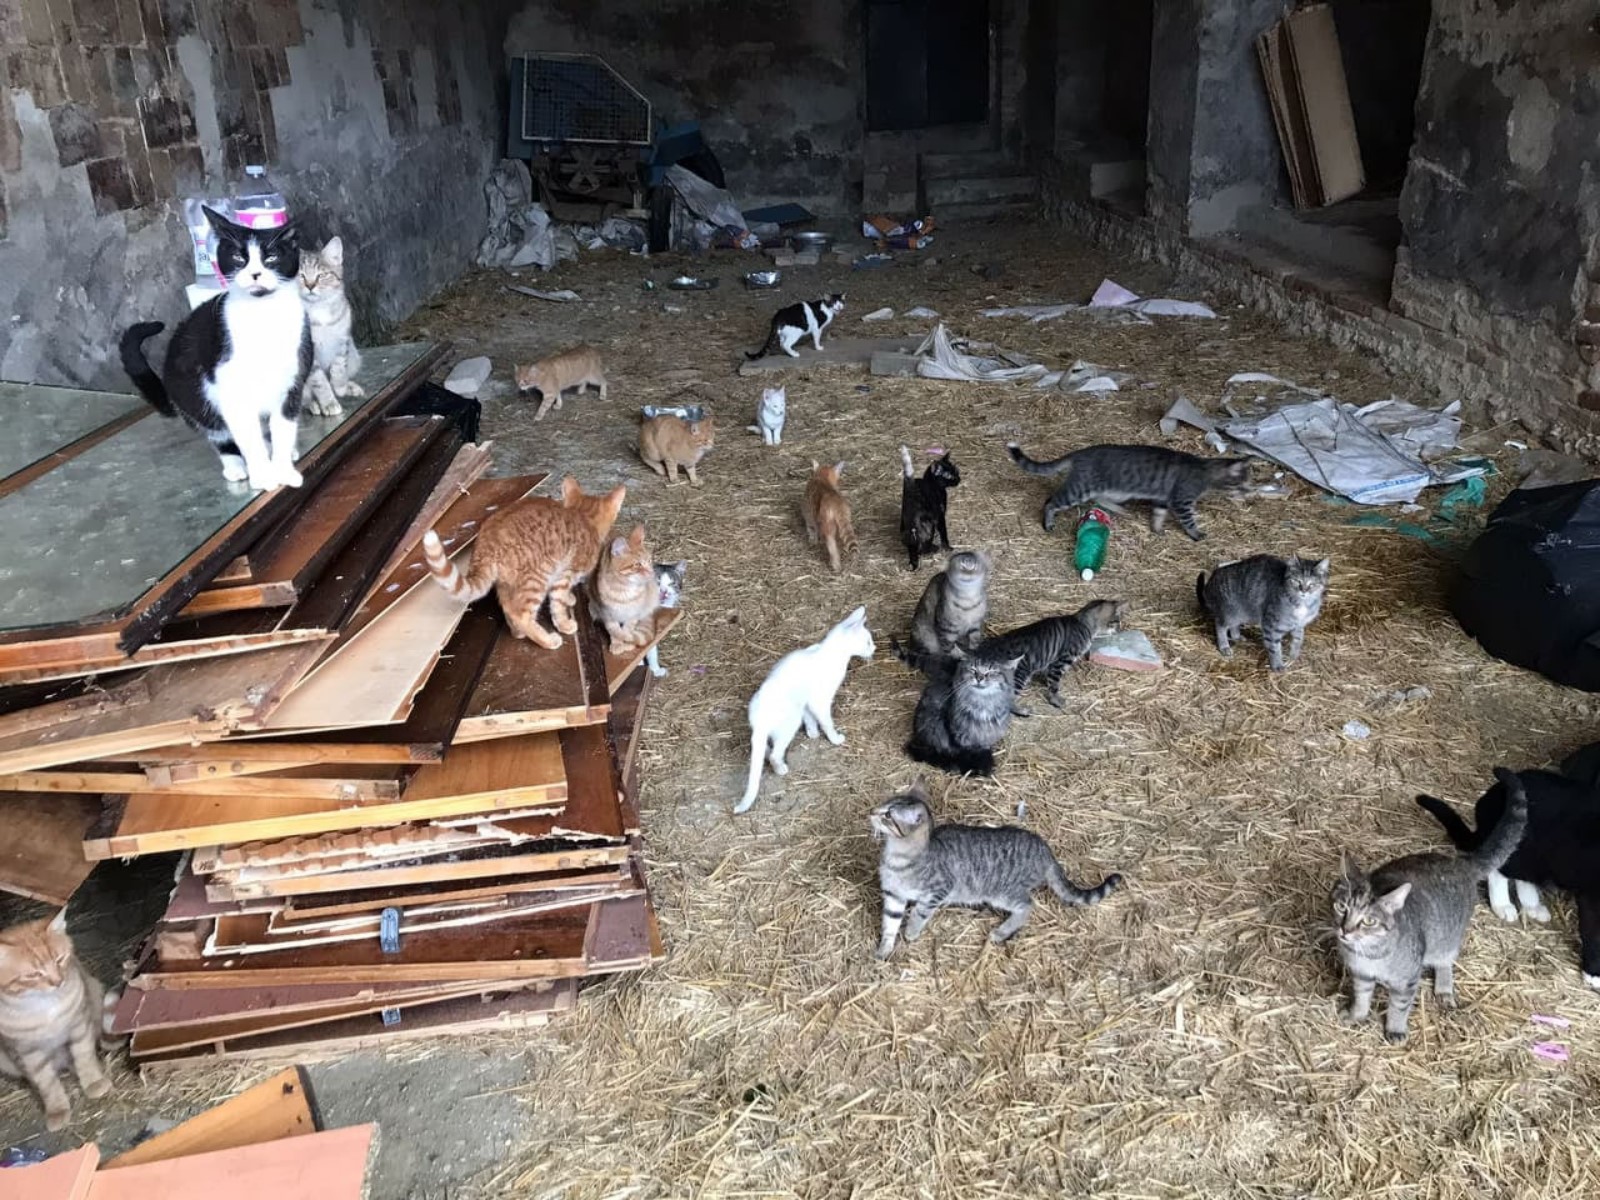 ANOTHER CASE OF ANIMAL HOARDING IN ITALY. 26 CATS ABANDONED IN A COUNTRY  COTTAGE AND OTHER 7 SEGREGATED IN A ROOM FULL OF EXCREMENT AND WASTE. NOW  THEY ARE SAVE! | OIPA